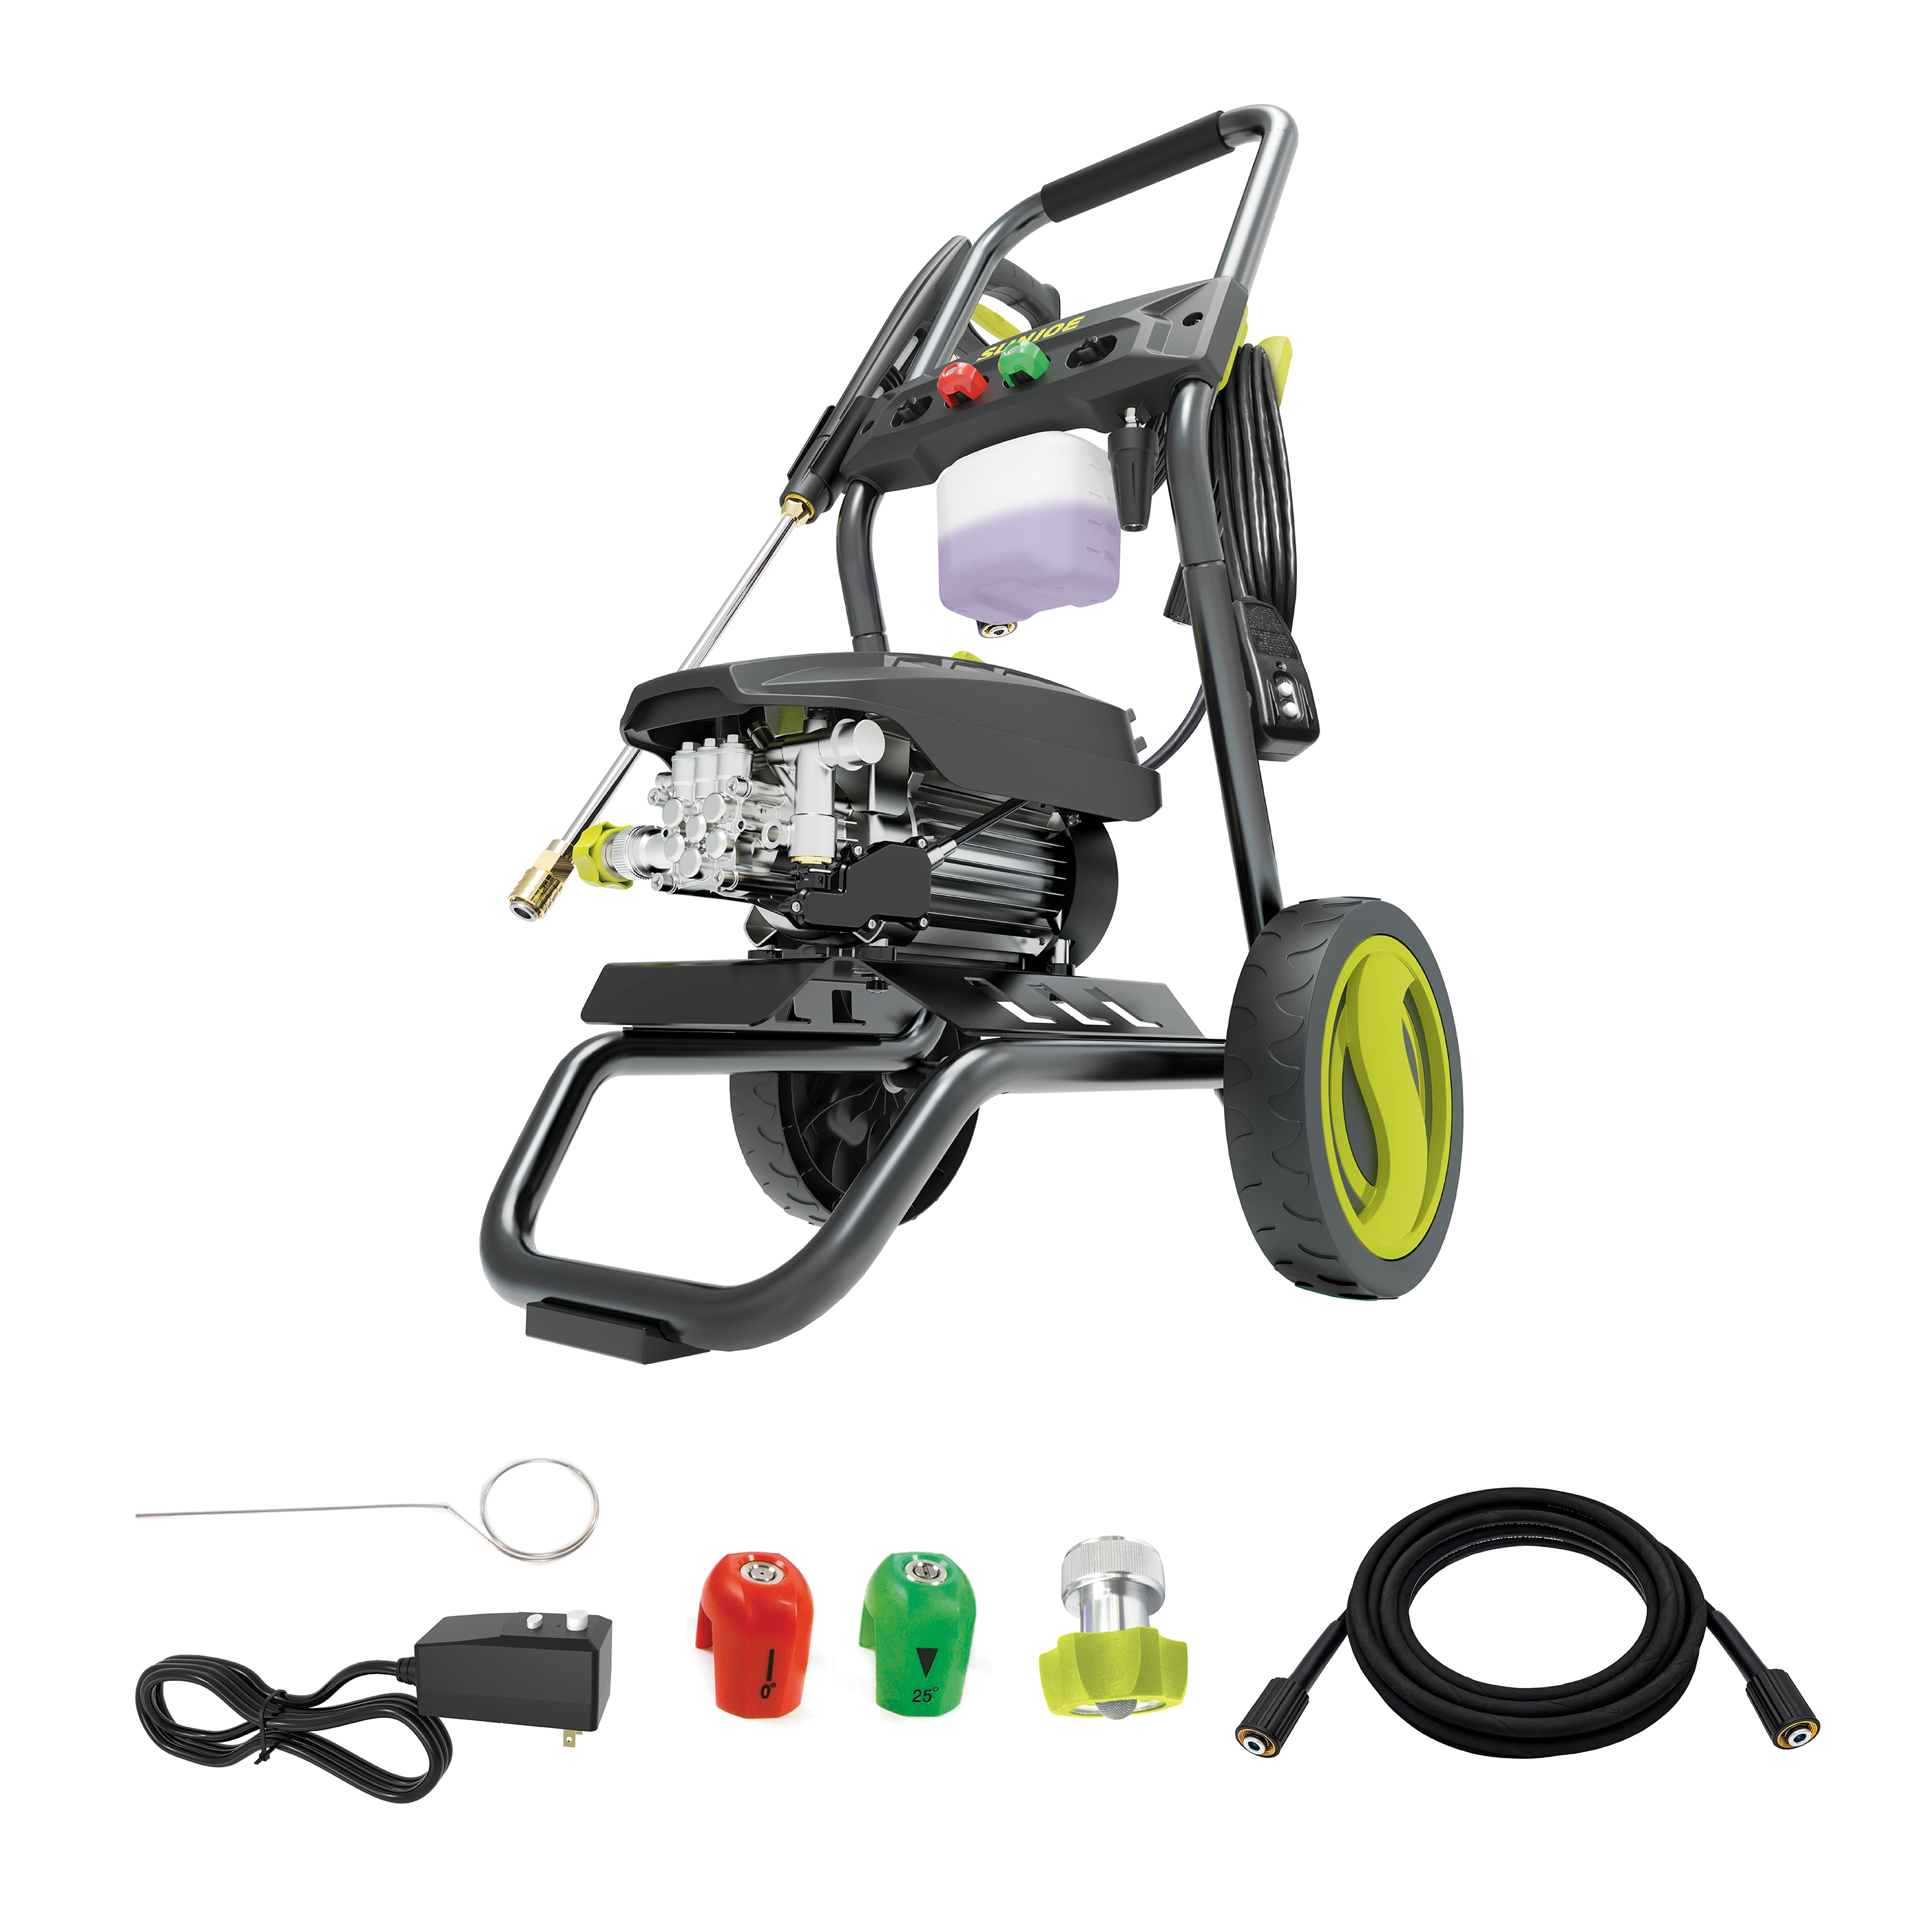 Sun Joe SPX8000-PRO High-Performance Brushless Induction Electric Pressure Washer W/ Steel Reinforced Hose, Quick Connect + Turbo Nozzles, & Metal Lance - image 1 of 10